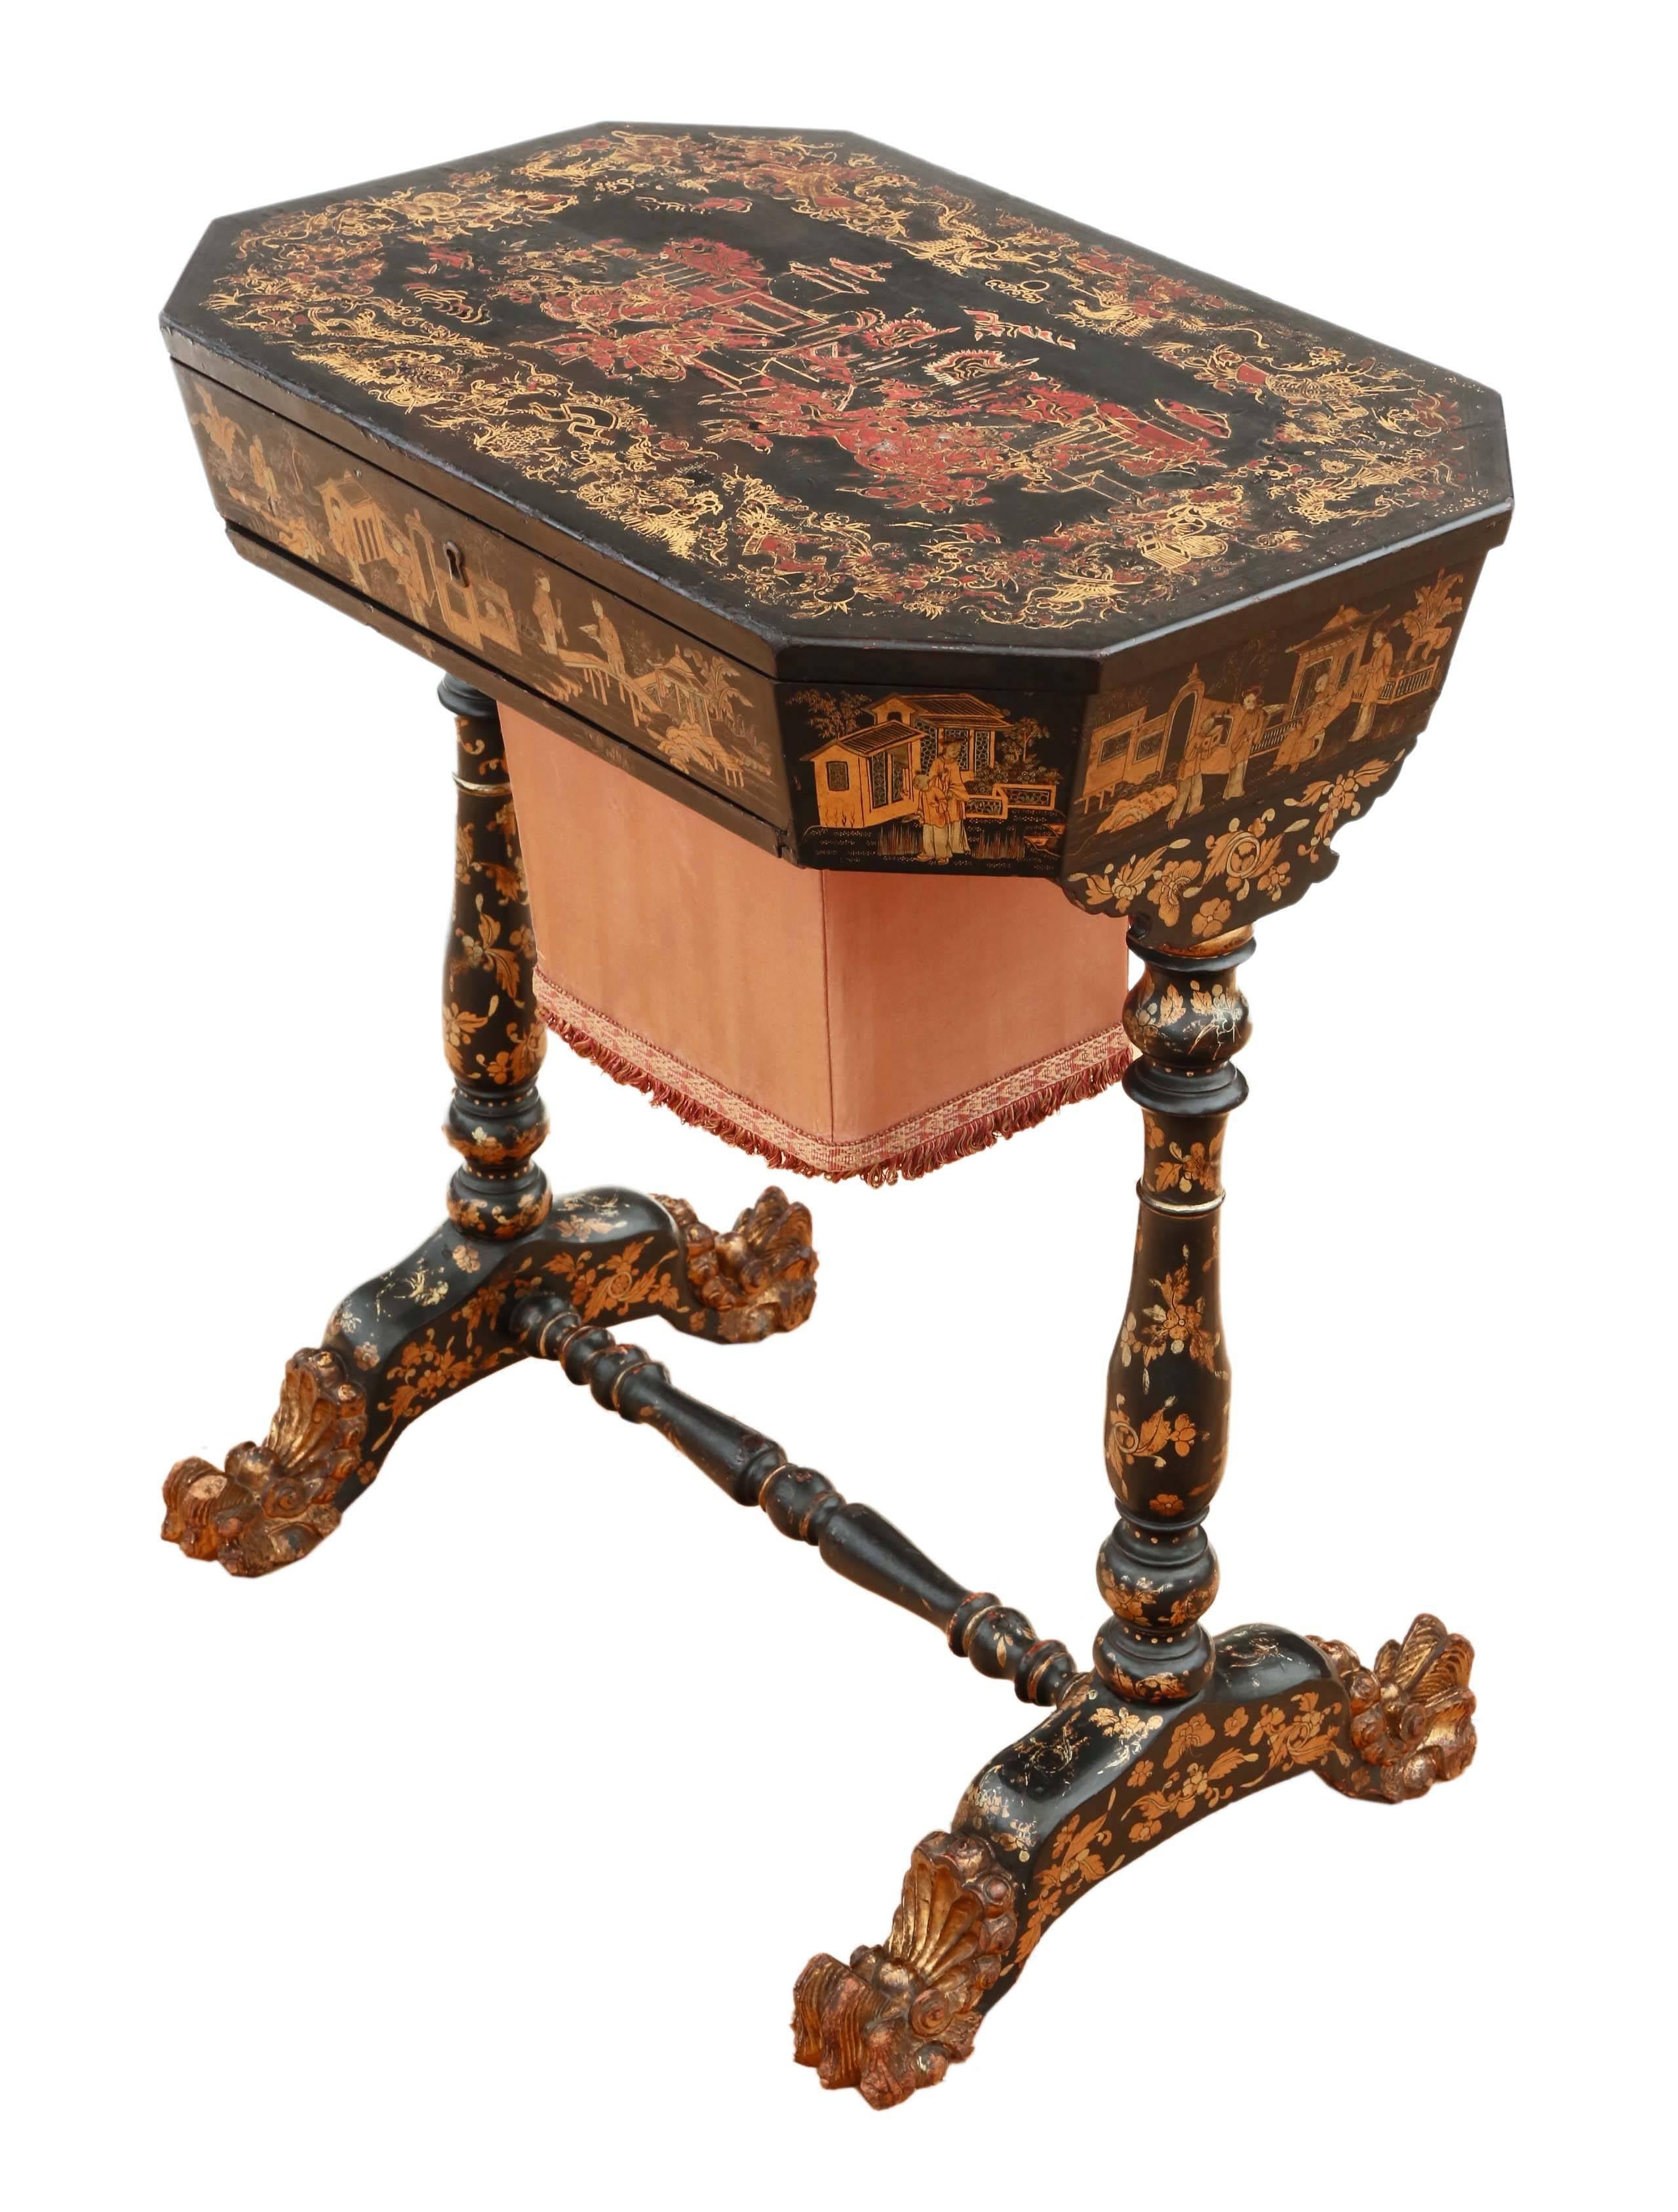 Antique rare quality 19th century decorated chinoiserie work side sewing box table.

This is a lovely item, that is full of age, charm and character. So very decorative. 

An attractive and rare piece.

Solid, with no loose joints or wobbles.